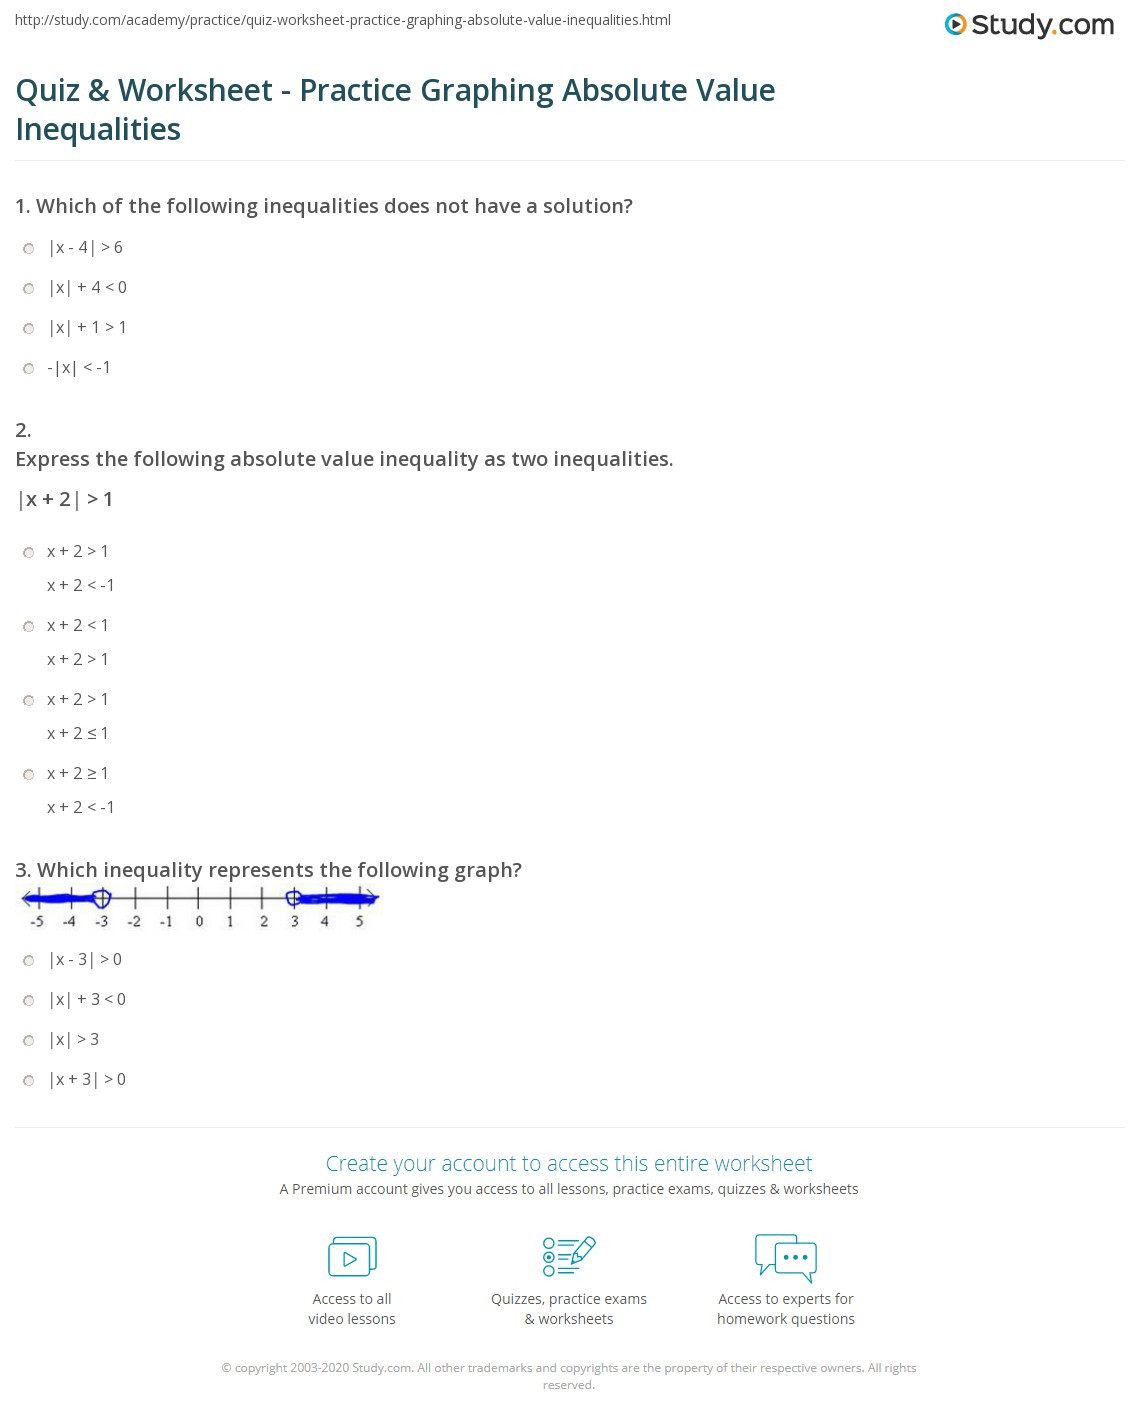 Solving Absolute Value Equations Worksheet Quiz &amp; Worksheet Practice Graphing Absolute Value